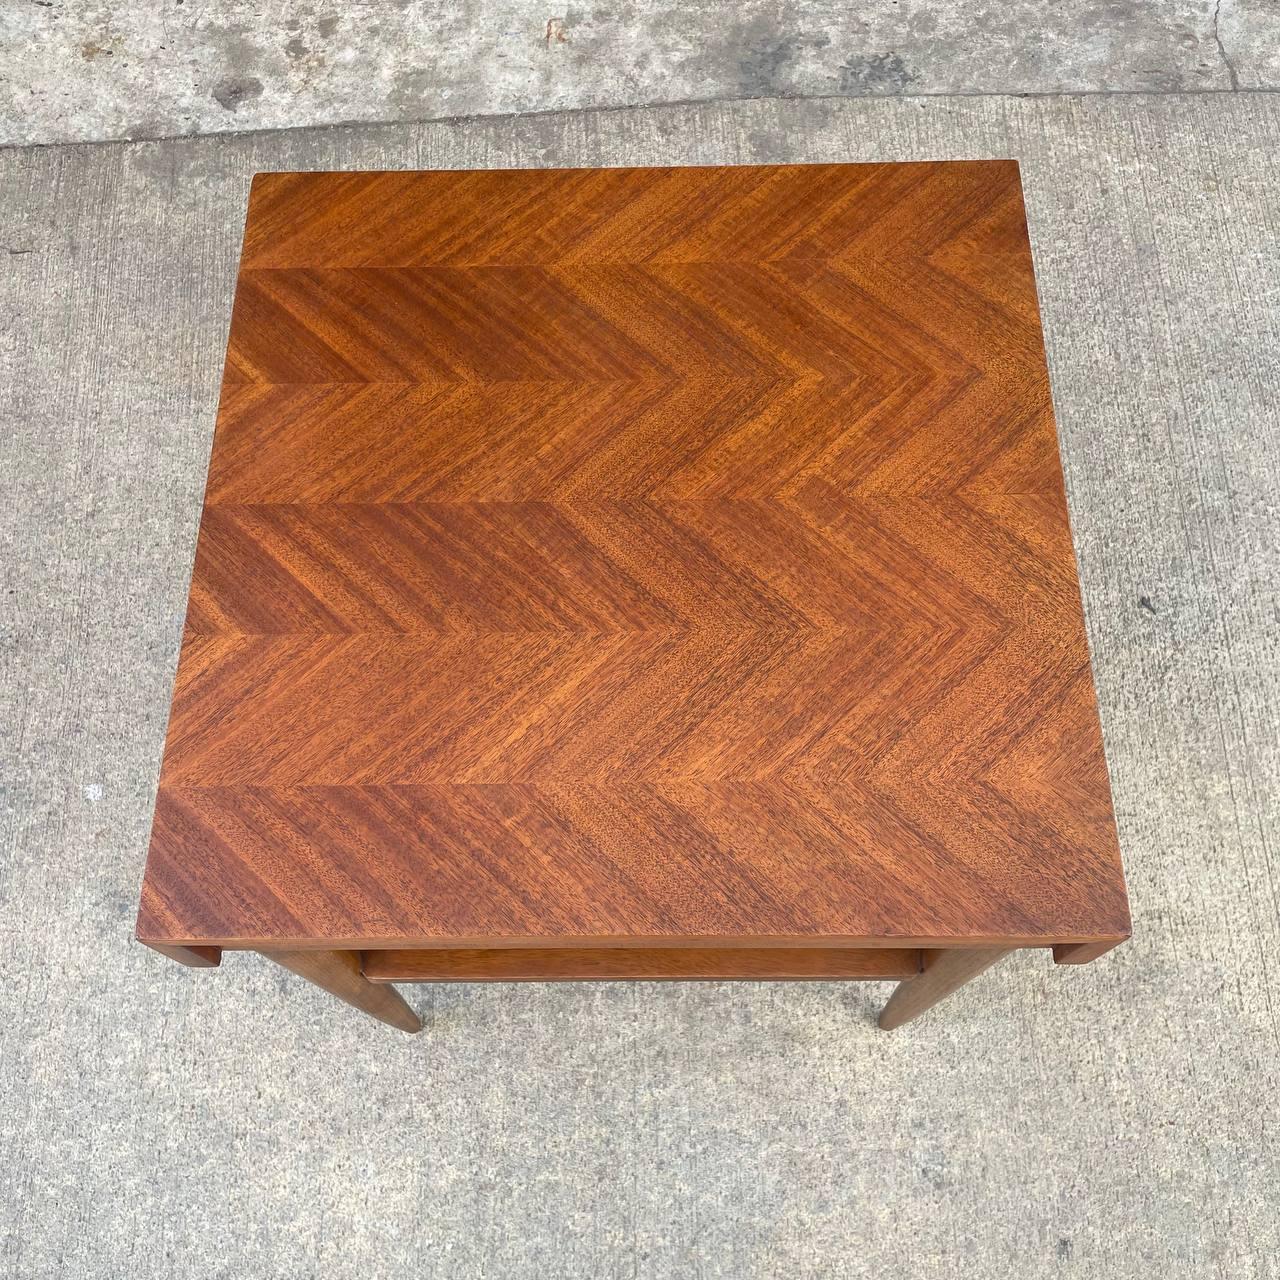 Newly Refinished - Mid-Century Modern Walnut Two-Tier Side Table by Lane 1